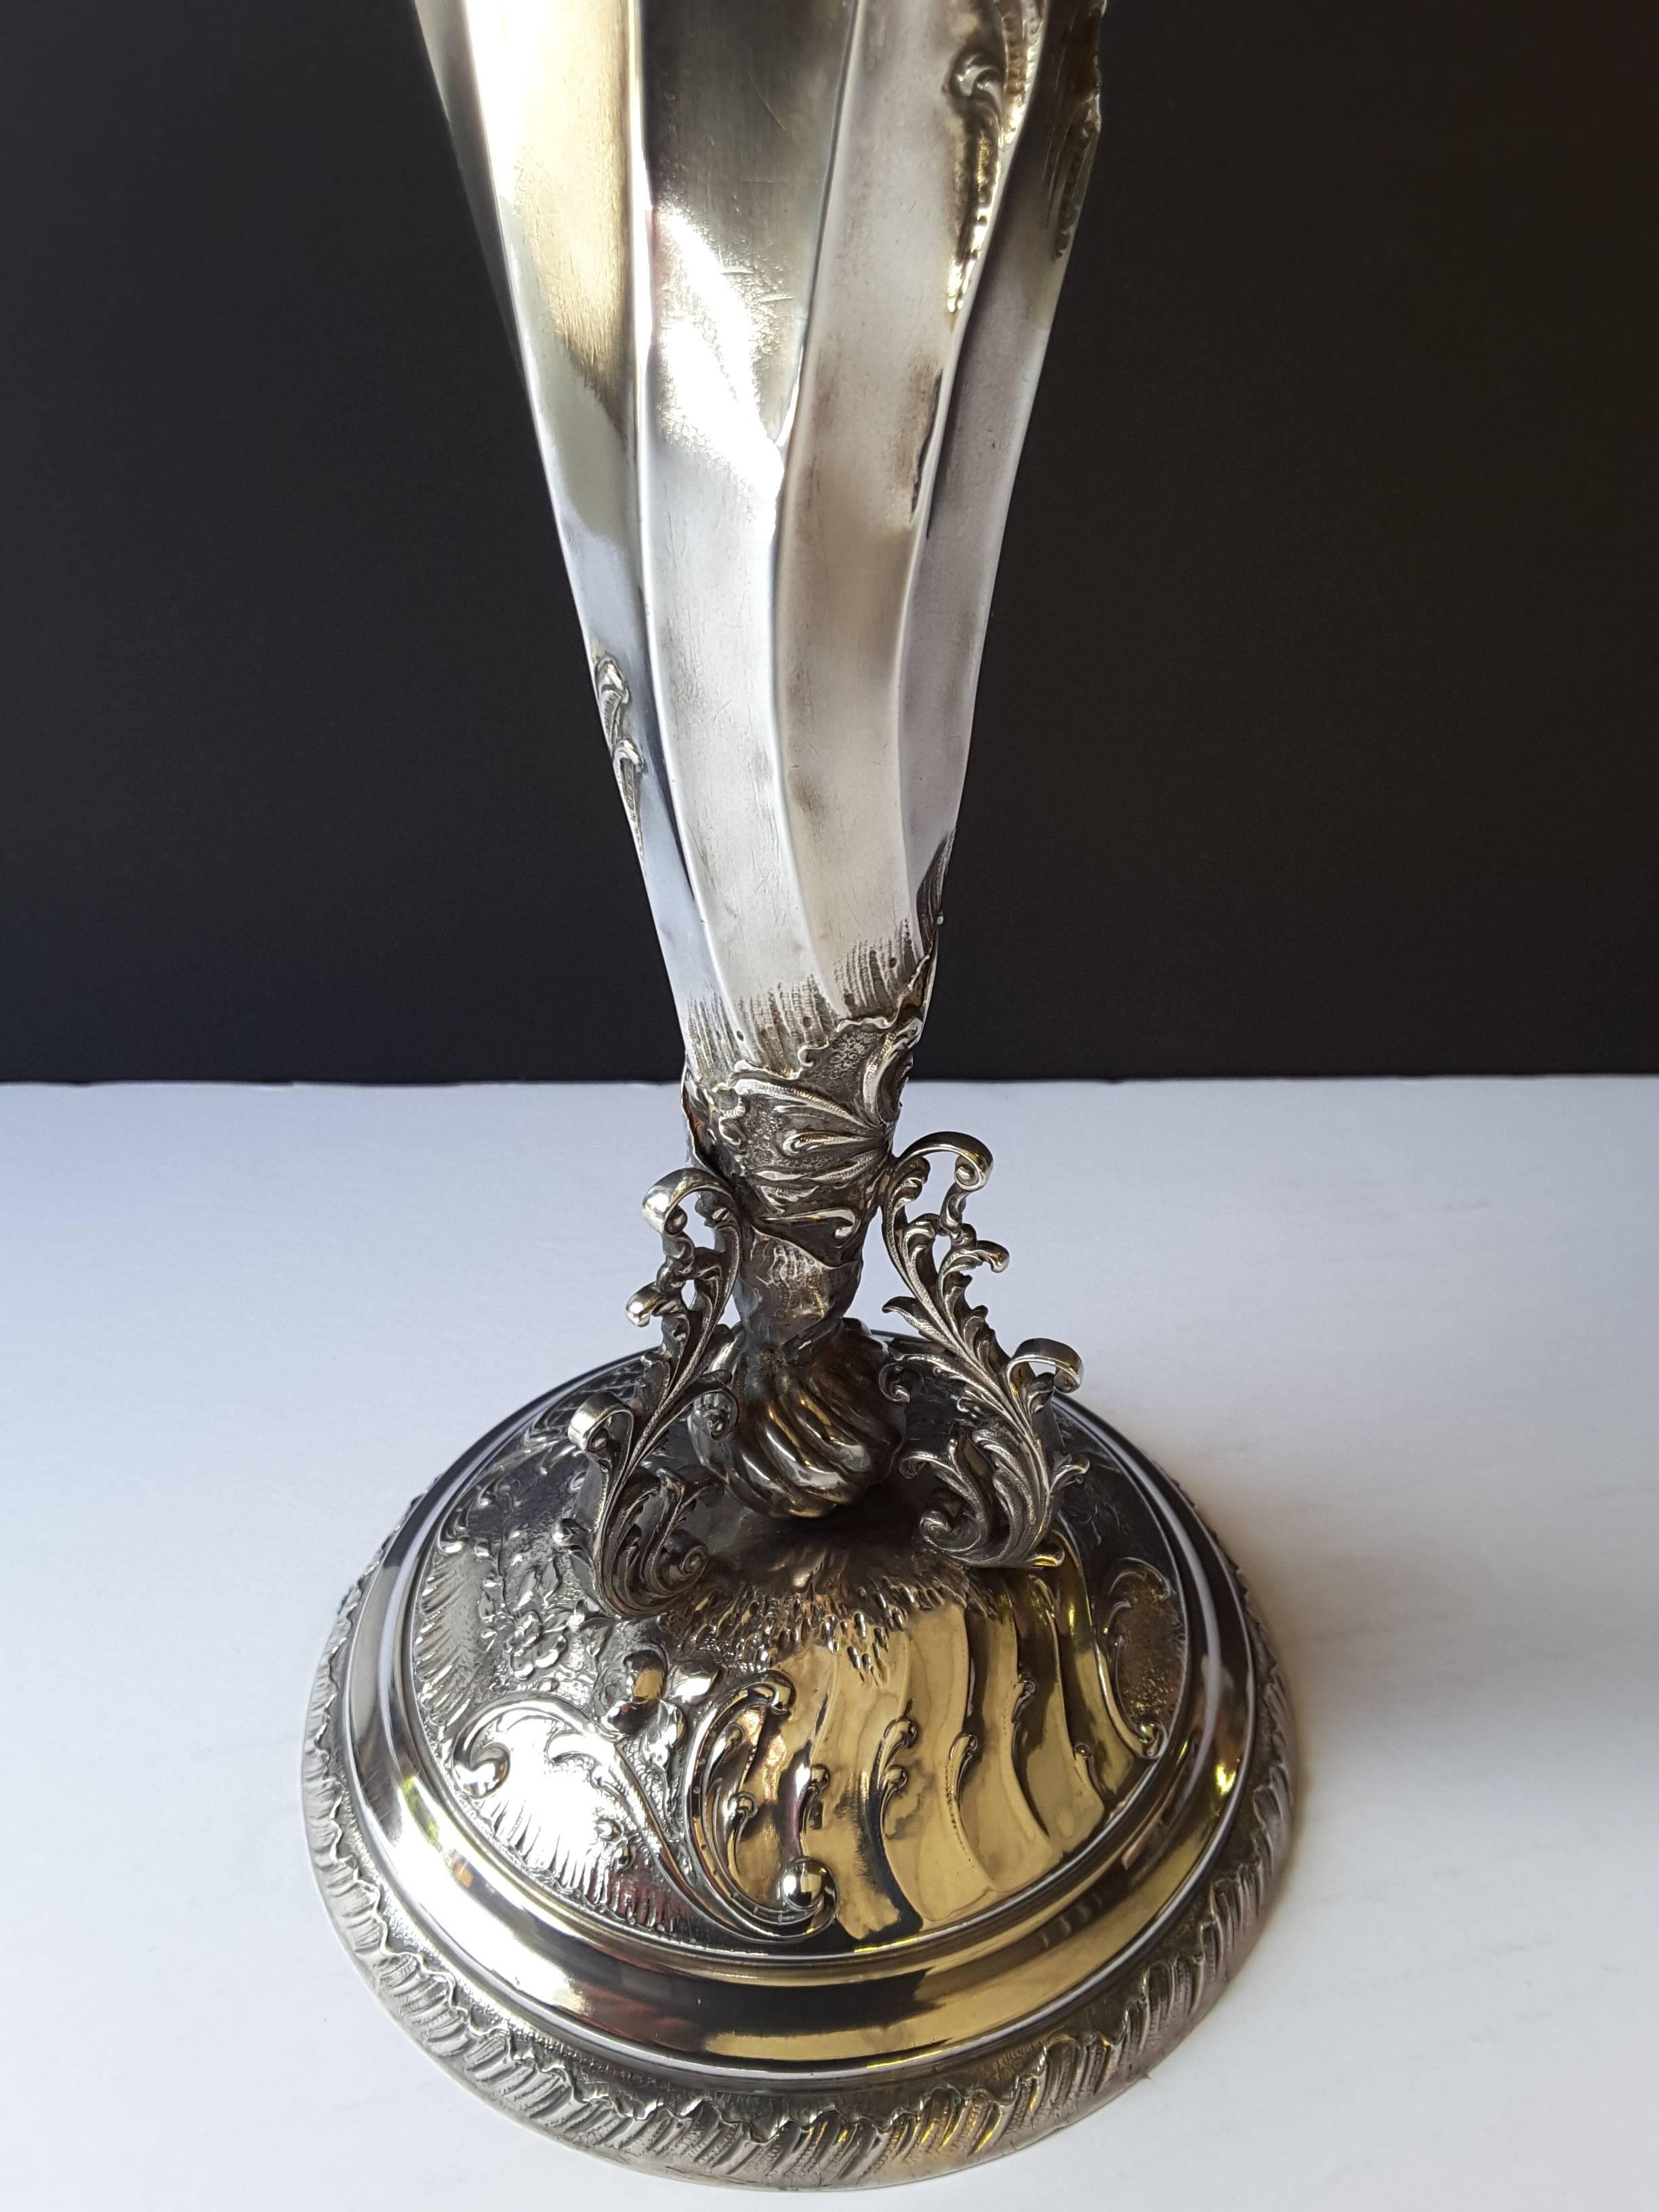 Edwardian French Antique Silver Trumpet/Epergne Vase, With Glass Wheel Cut Insert